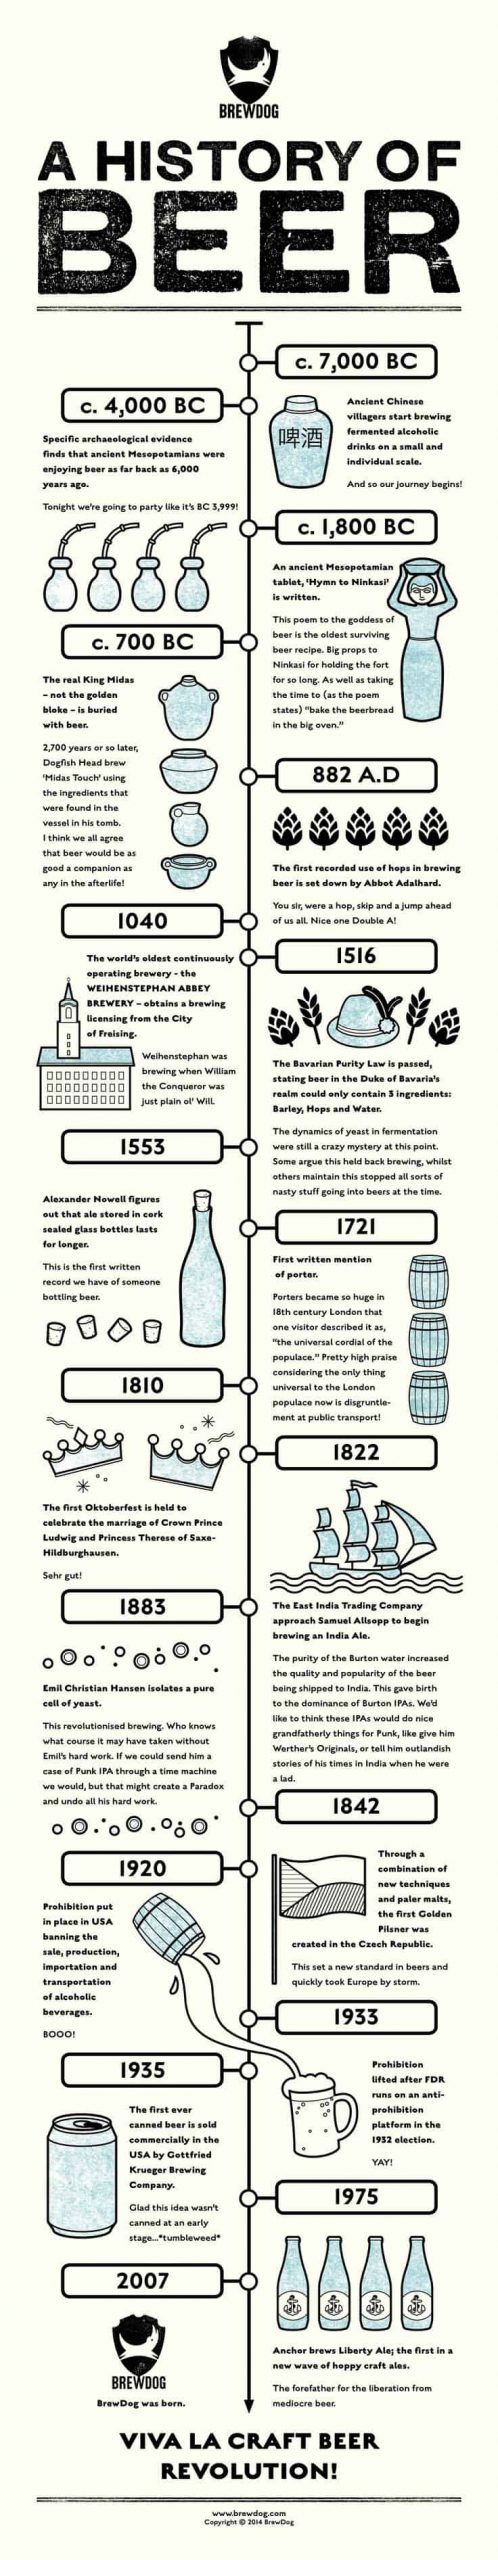 history of beer, timeline infographic examples